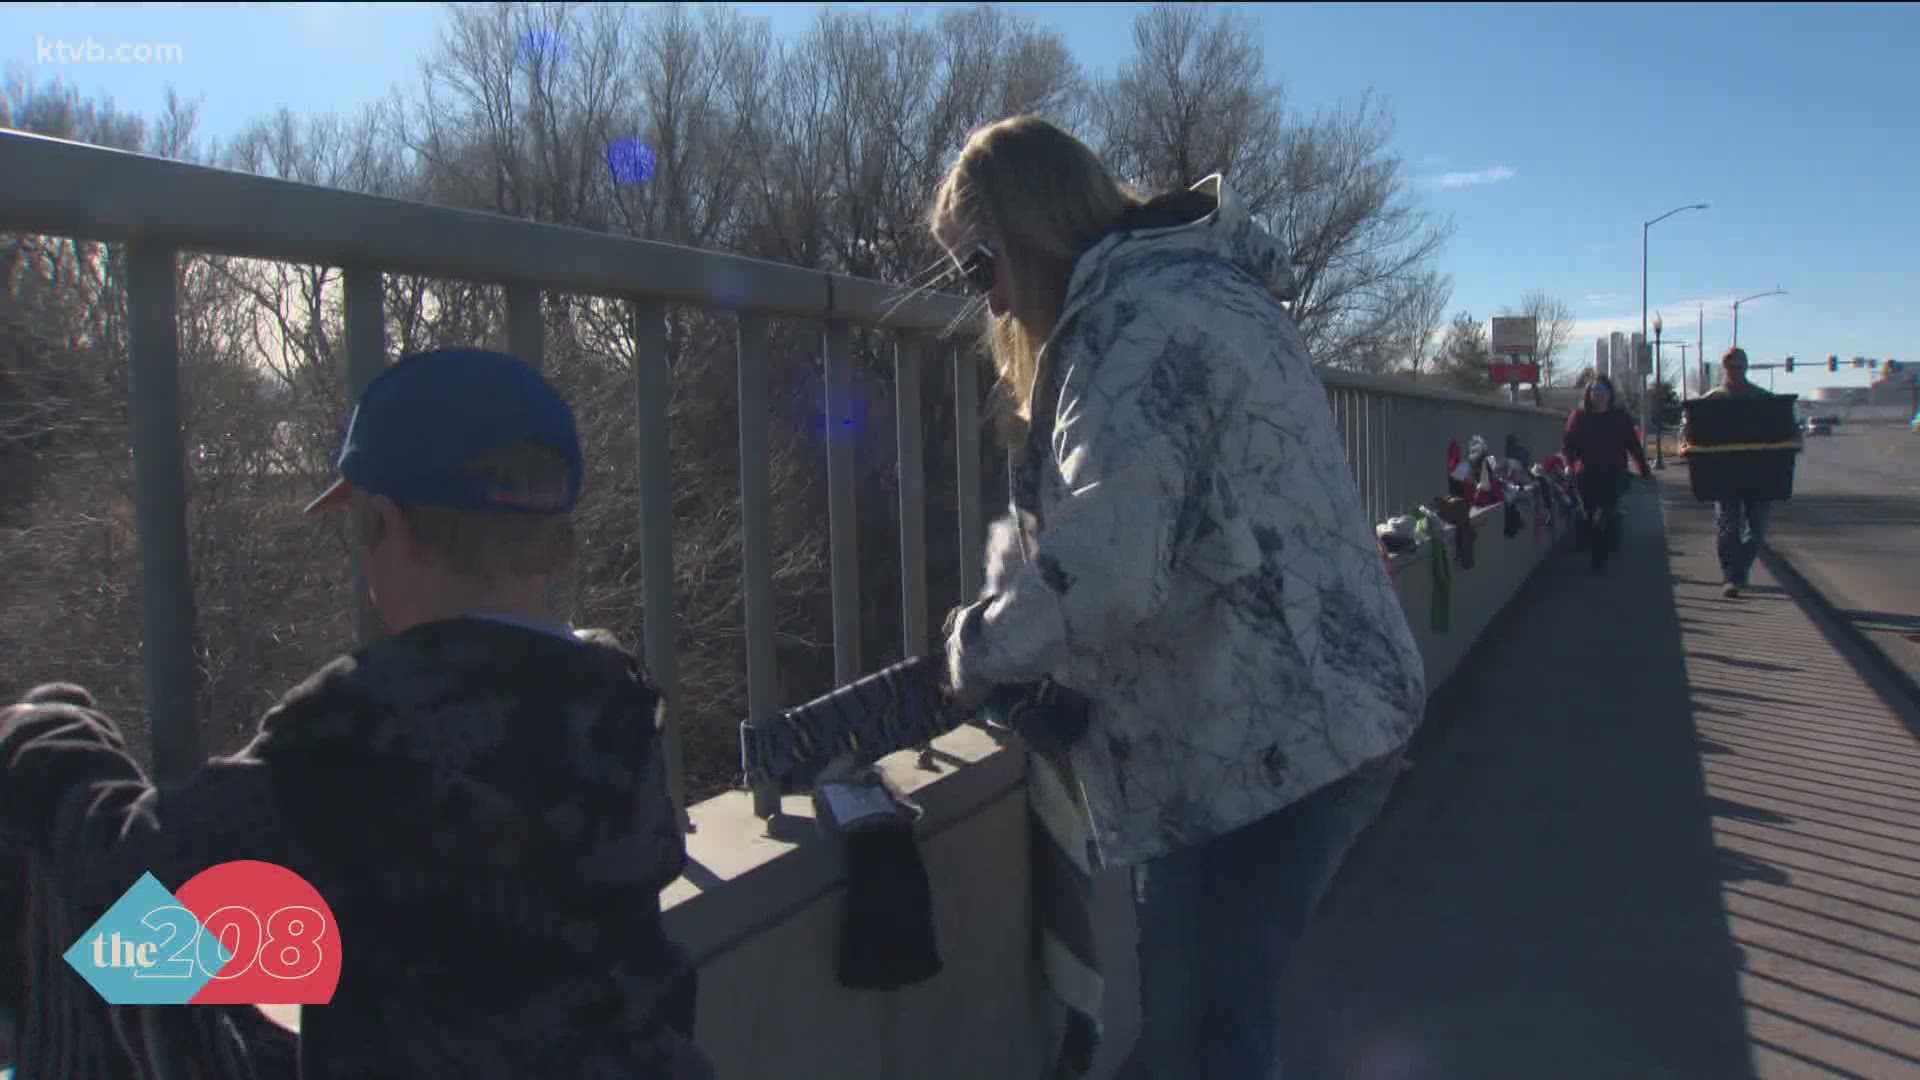 Idaho Angels is working to bridge the gap to help others get back on their feet.